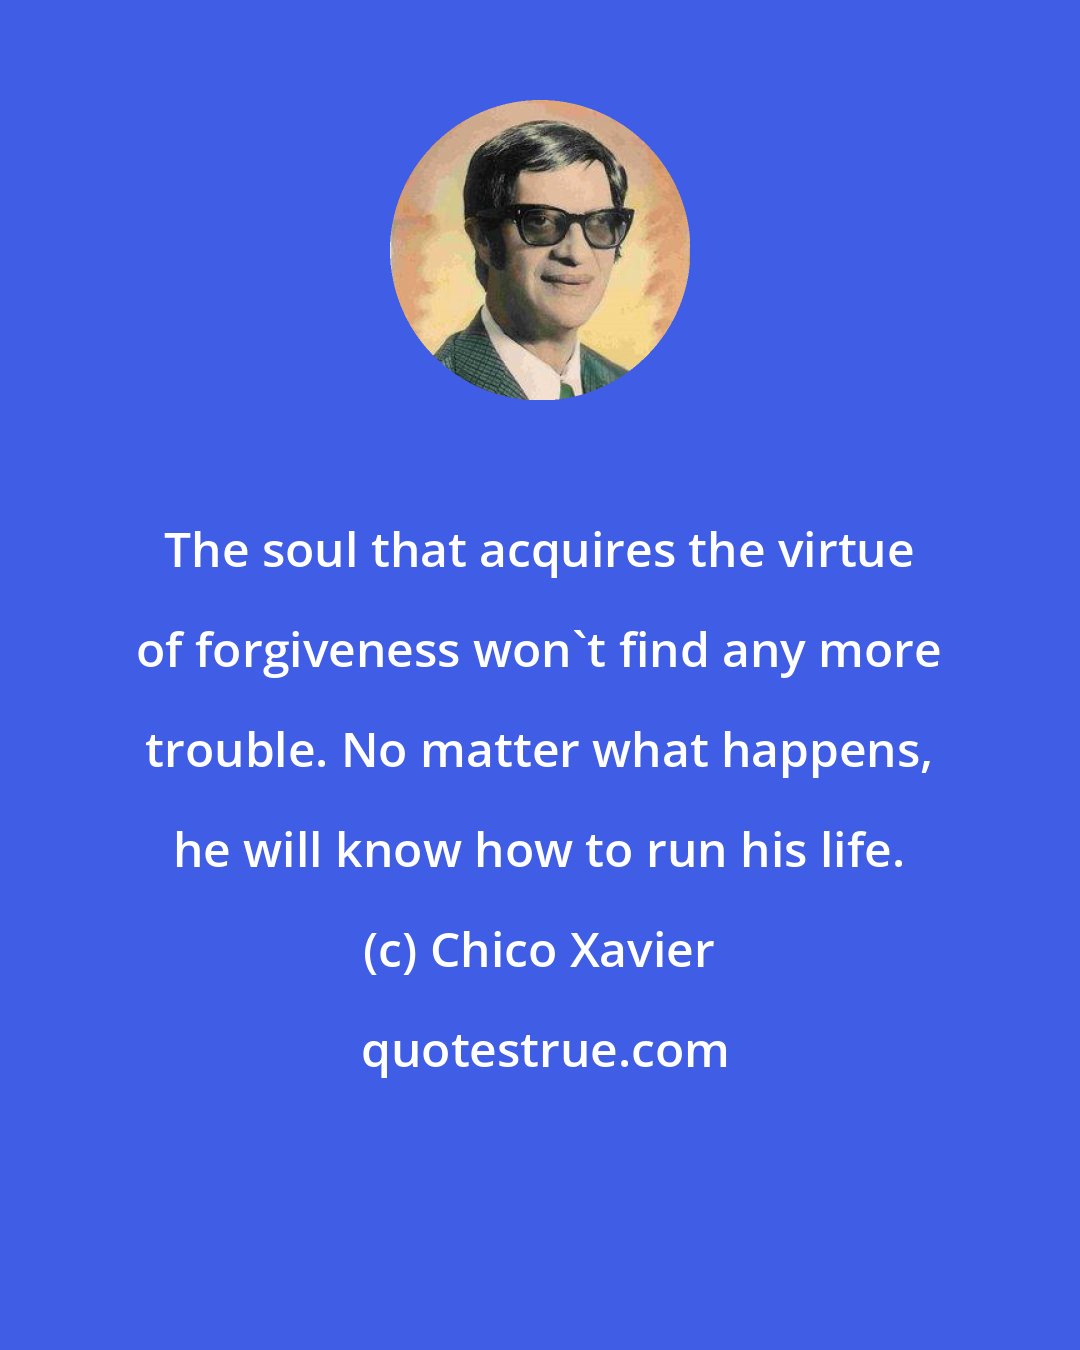 Chico Xavier: The soul that acquires the virtue of forgiveness won't find any more trouble. No matter what happens, he will know how to run his life.